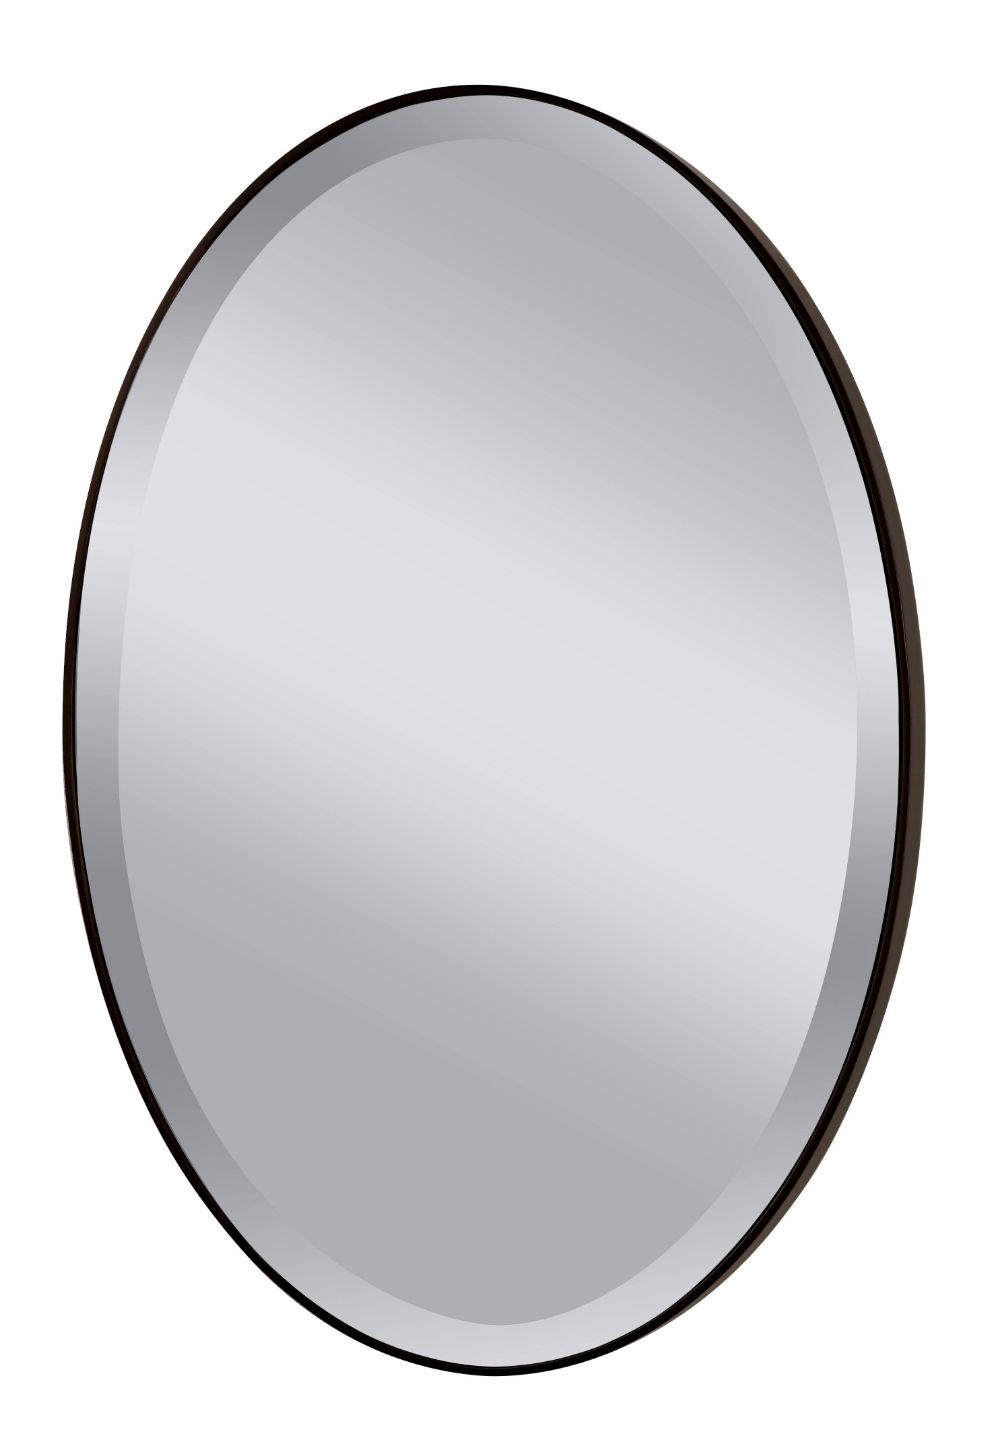 Feiss Johnson Oil Rubbed Bronze Mirror | Oval Mirror, Oval Wall Mirror With Regard To Oil Rubbed Bronze Oval Wall Mirrors (View 9 of 15)